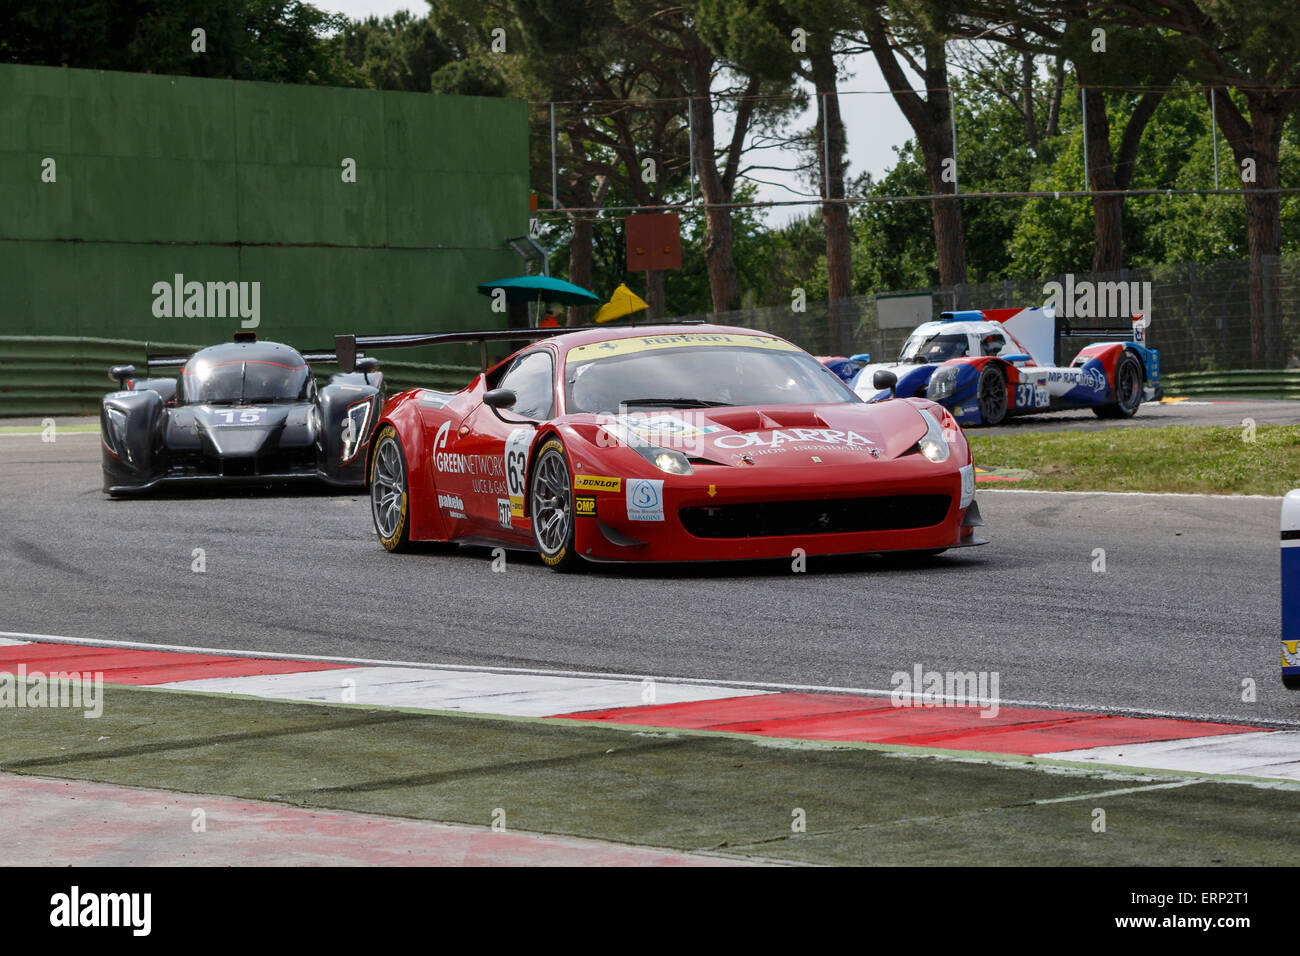 Imola, Italy – May 16, 2015: Ferrari F458 Italia GT3 of Af Corse Team,  in action during the European Le Mans Series Stock Photo